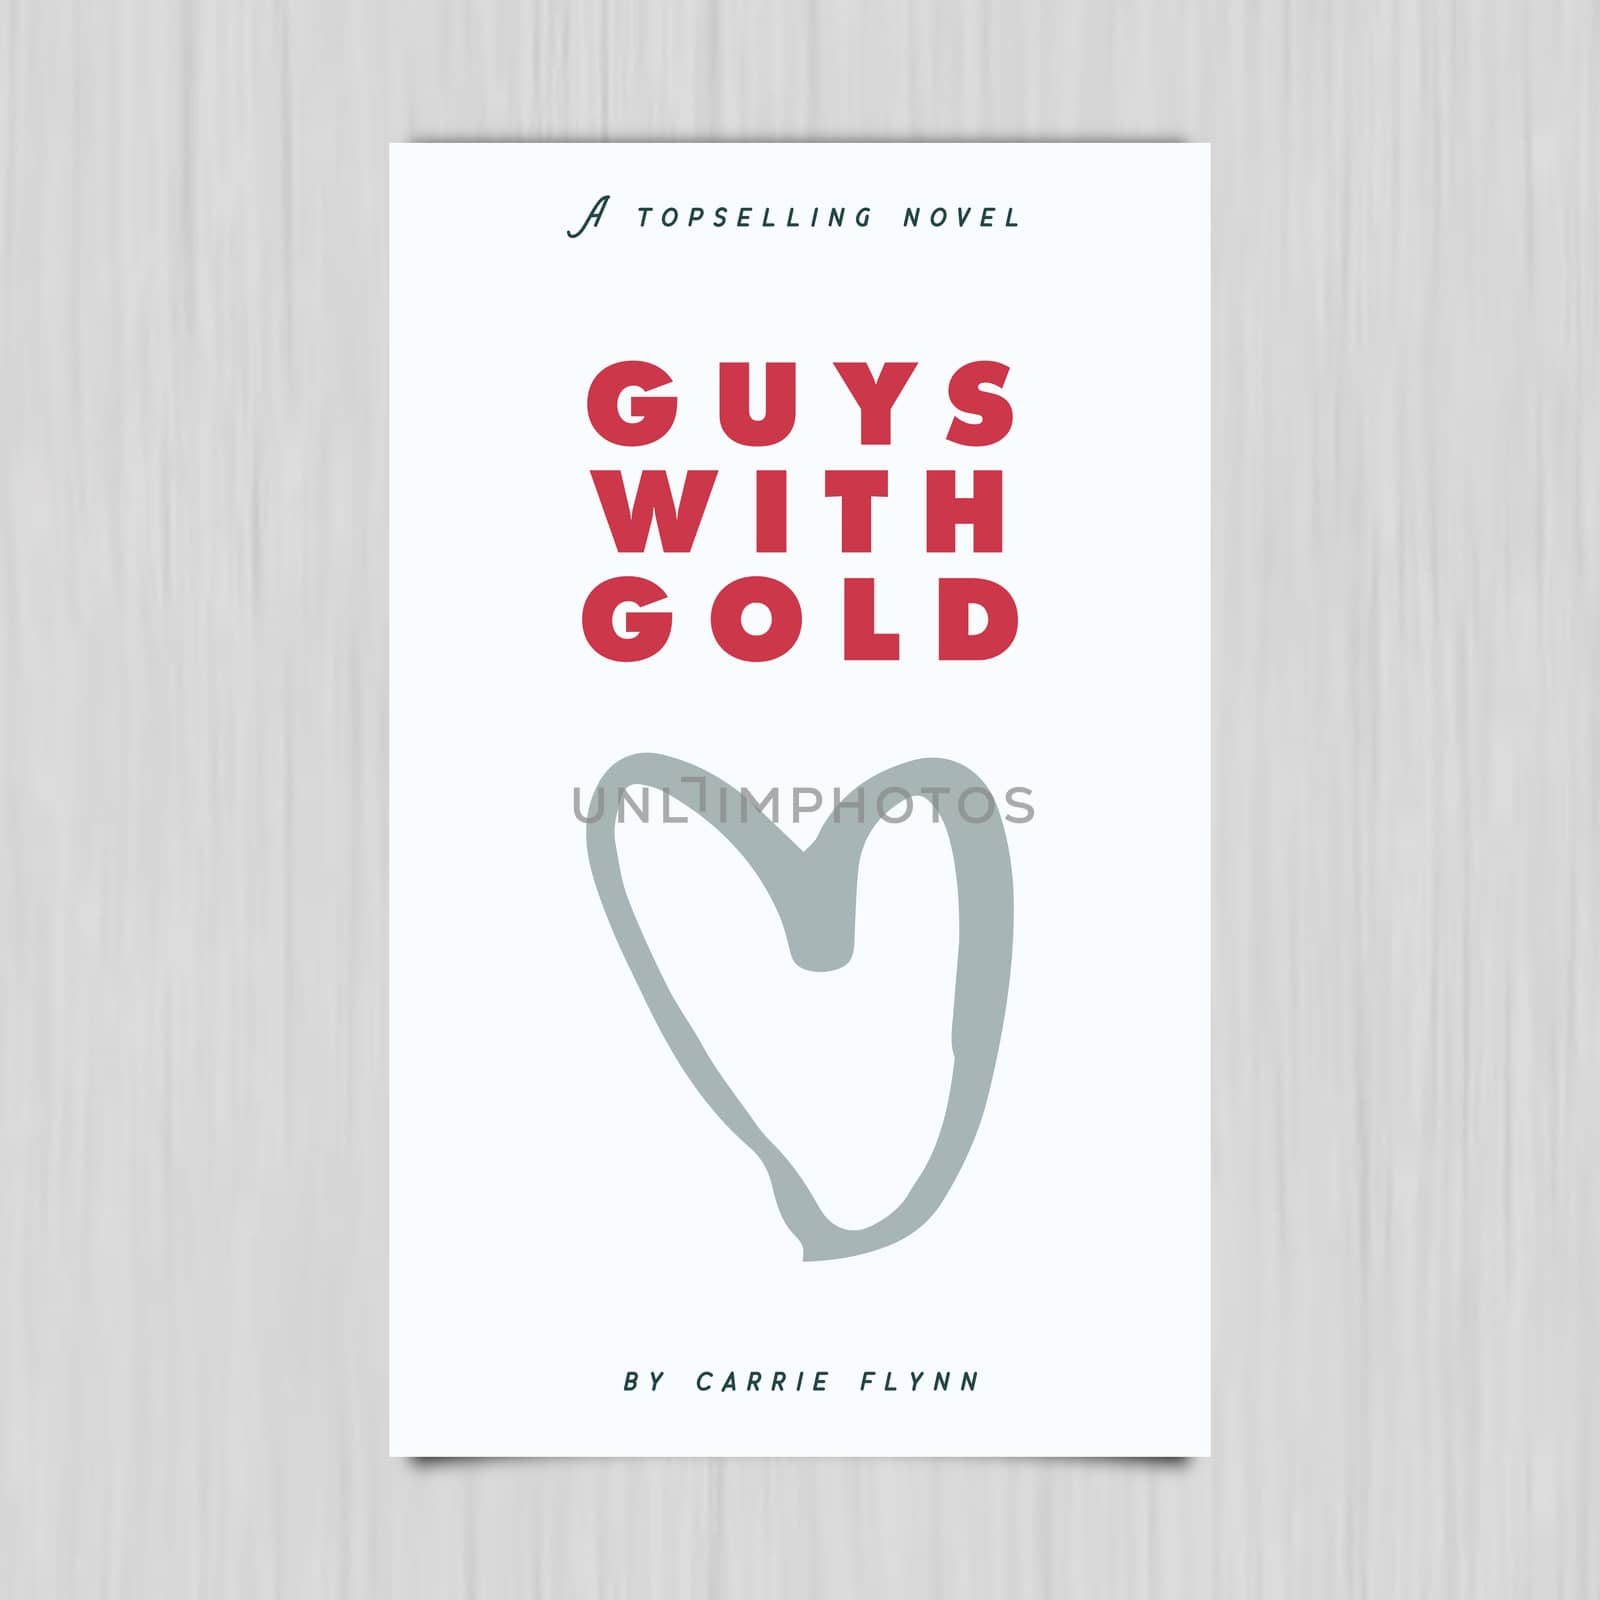 Vector of novel cover with guys with gold text by Wavebreakmedia